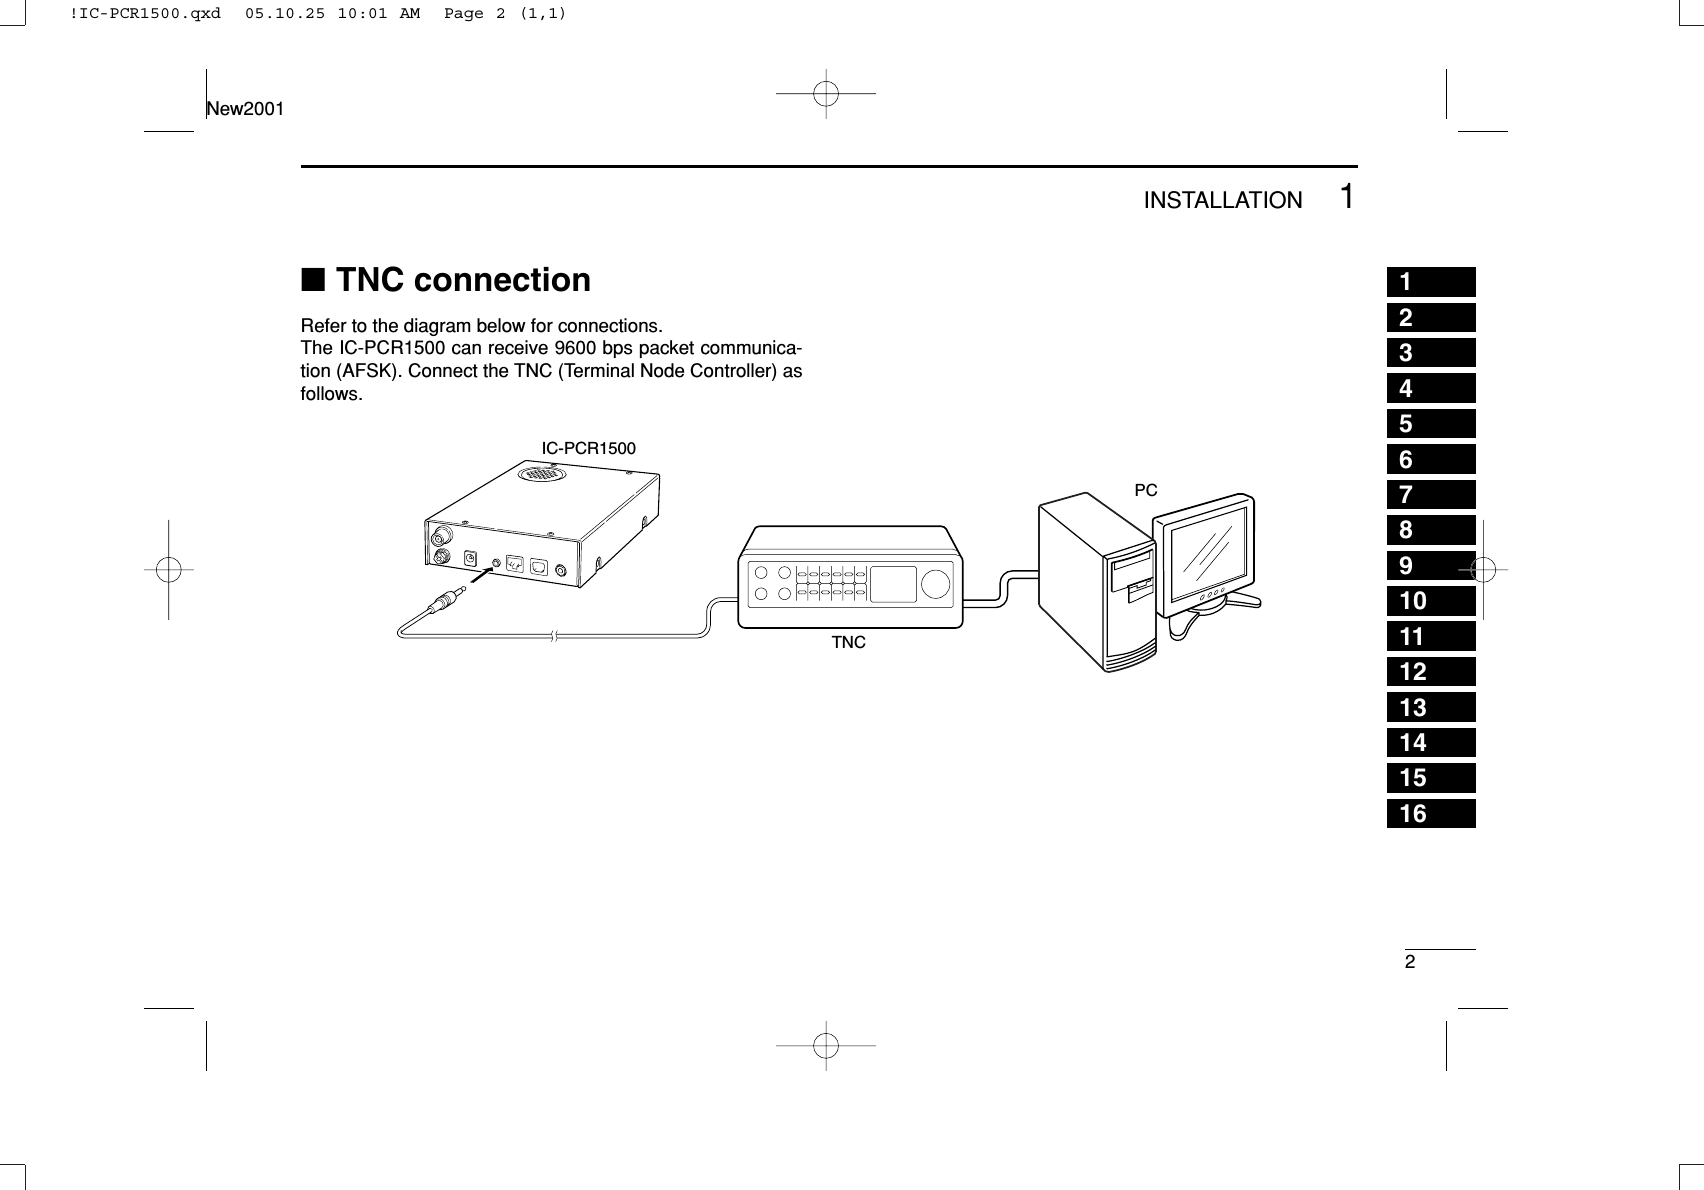 21INSTALLATIONNew200112345678910111213141516■TNC connectionRefer to the diagram below for connections.The IC-PCR1500 can receive 9600 bps packet communica-tion (AFSK). Connect the TNC (Terminal Node Controller) asfollows.TNCIC-PCR1500PC!IC-PCR1500.qxd  05.10.25 10:01 AM  Page 2 (1,1)